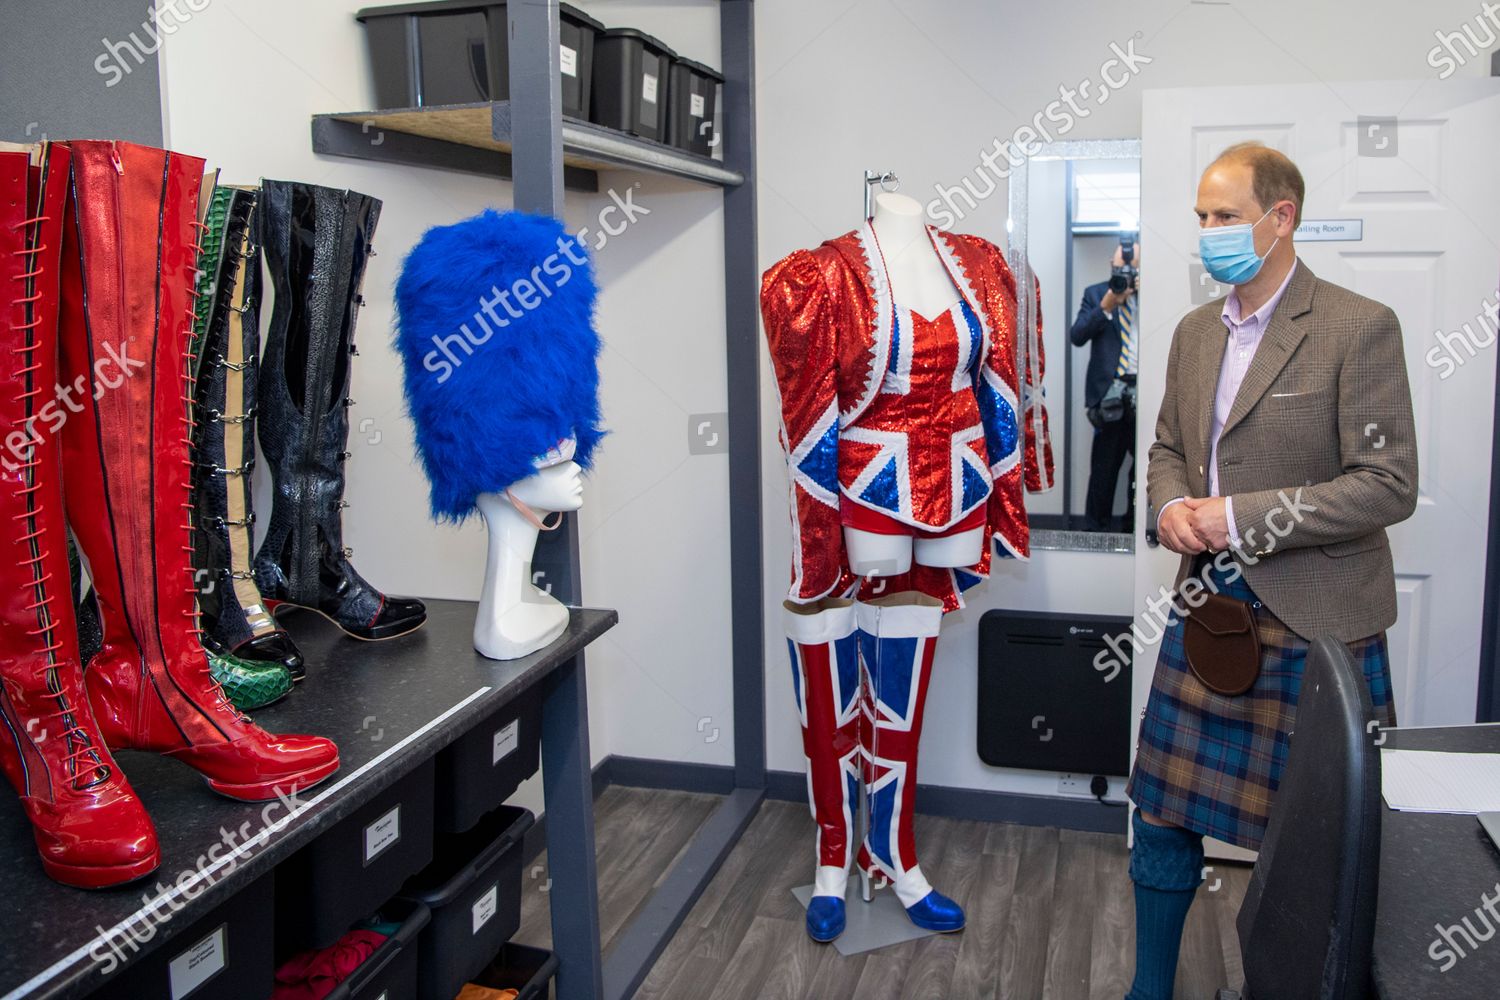 CASA REAL BRITÁNICA - Página 75 Prince-edward-and-sophie-countess-of-wessex-visit-to-utopia-costumes-forfar-scotland-uk-shutterstock-editorial-12172309bn